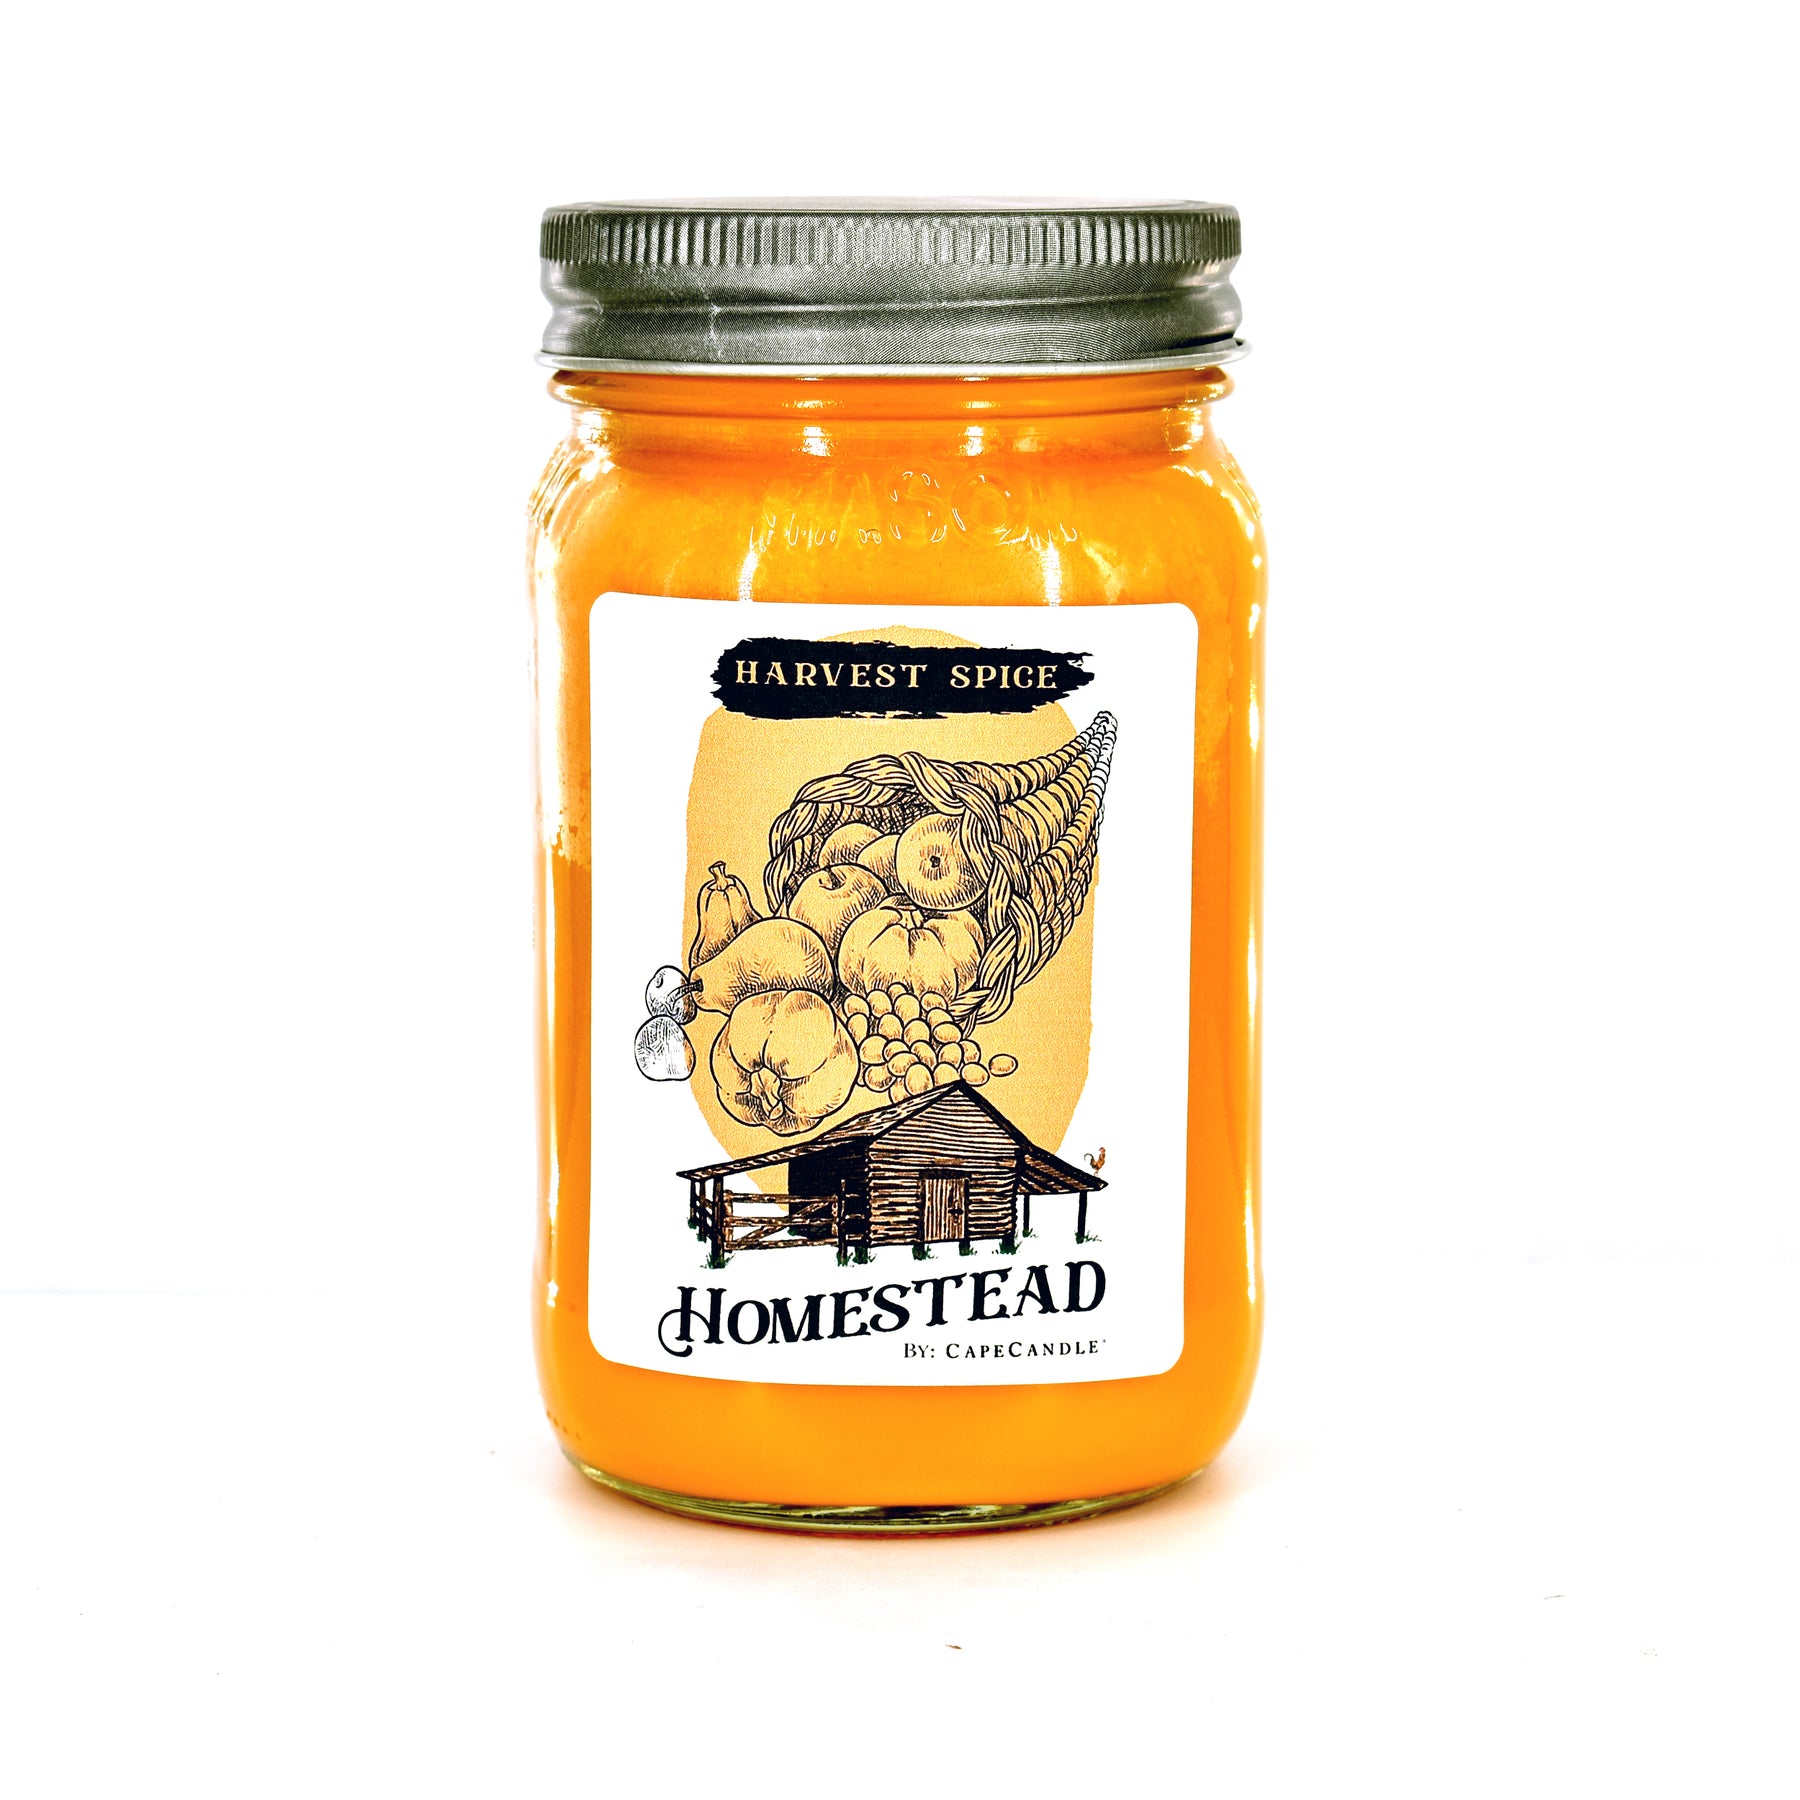 Harvest Spice Soy Candle 16oz Homestead Mason Jar by Cape Candle